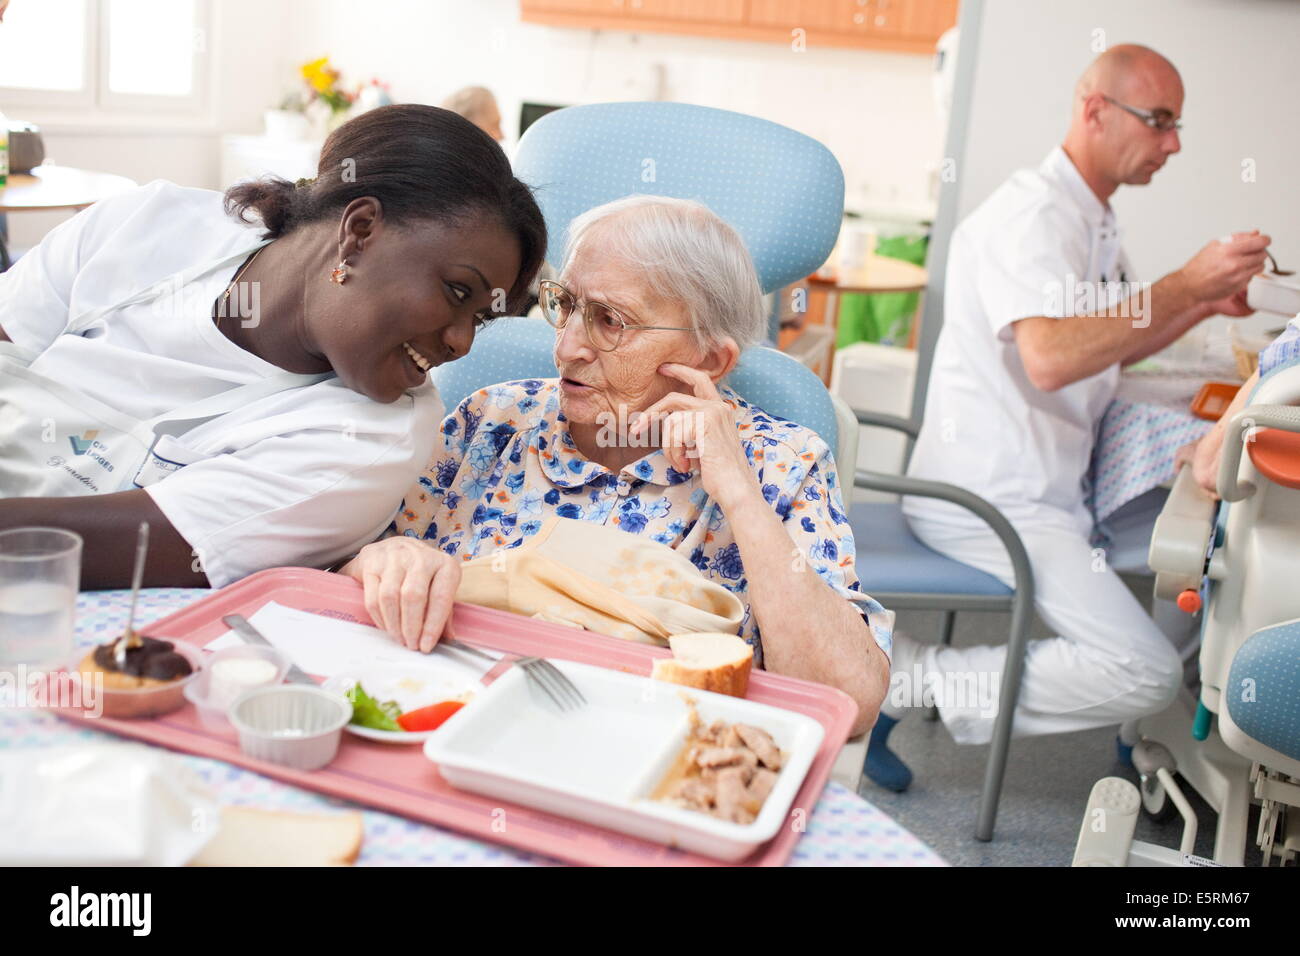 Auxiliary nurse helping an elderly person to take meal; Residential home for dependent elderly person, Limoges, France. Stock Photo